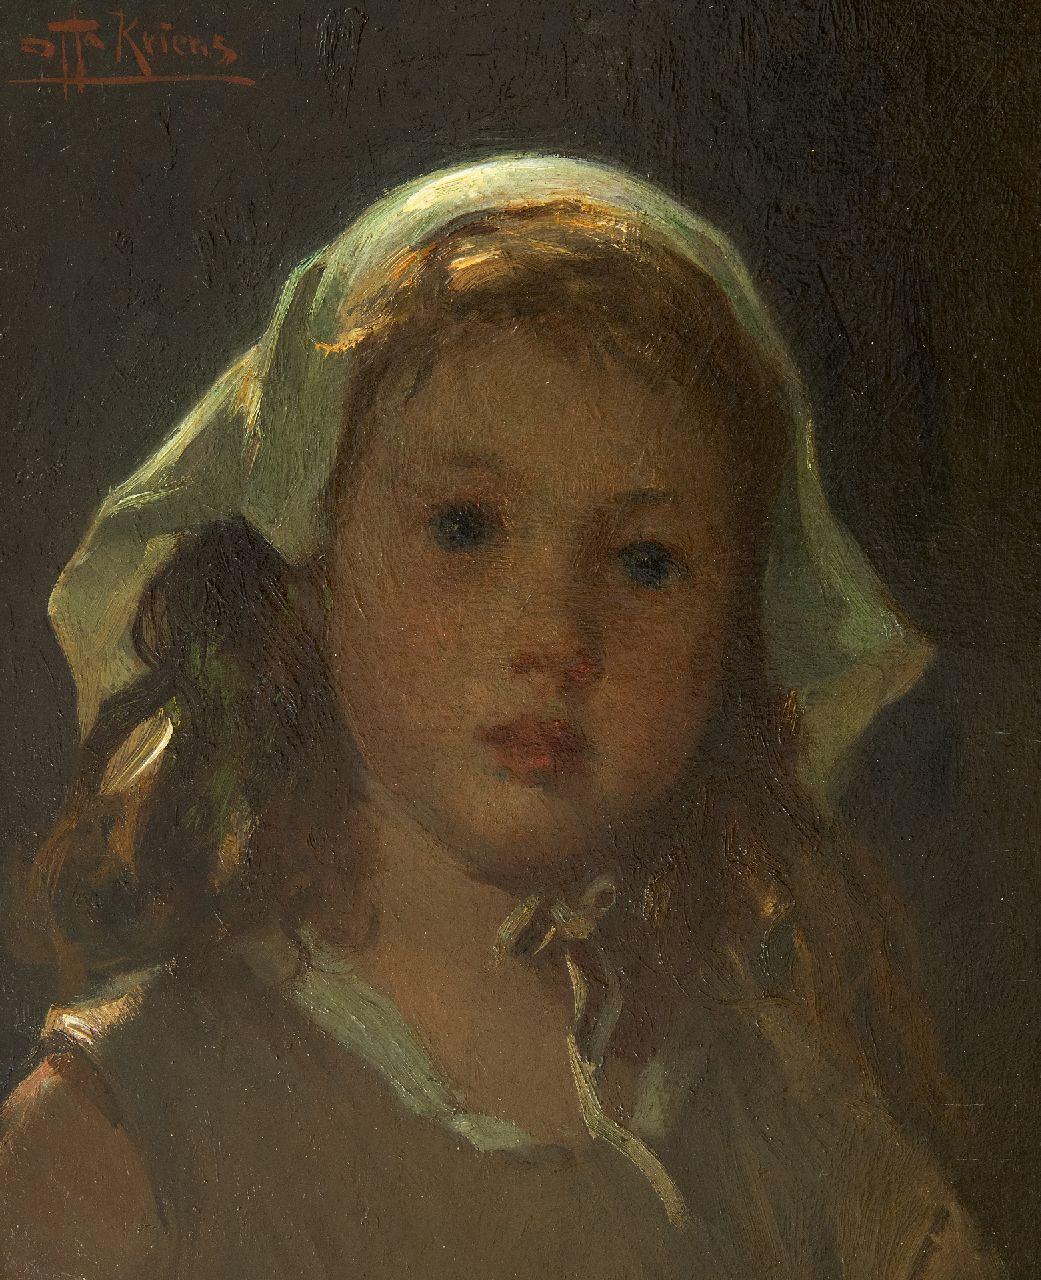 Kriens O.G.A.  | 'Otto' Gustav Adolf Kriens | Paintings offered for sale | Girl's head, oil on panel 33.0 x 27.2 cm, signed u.l.